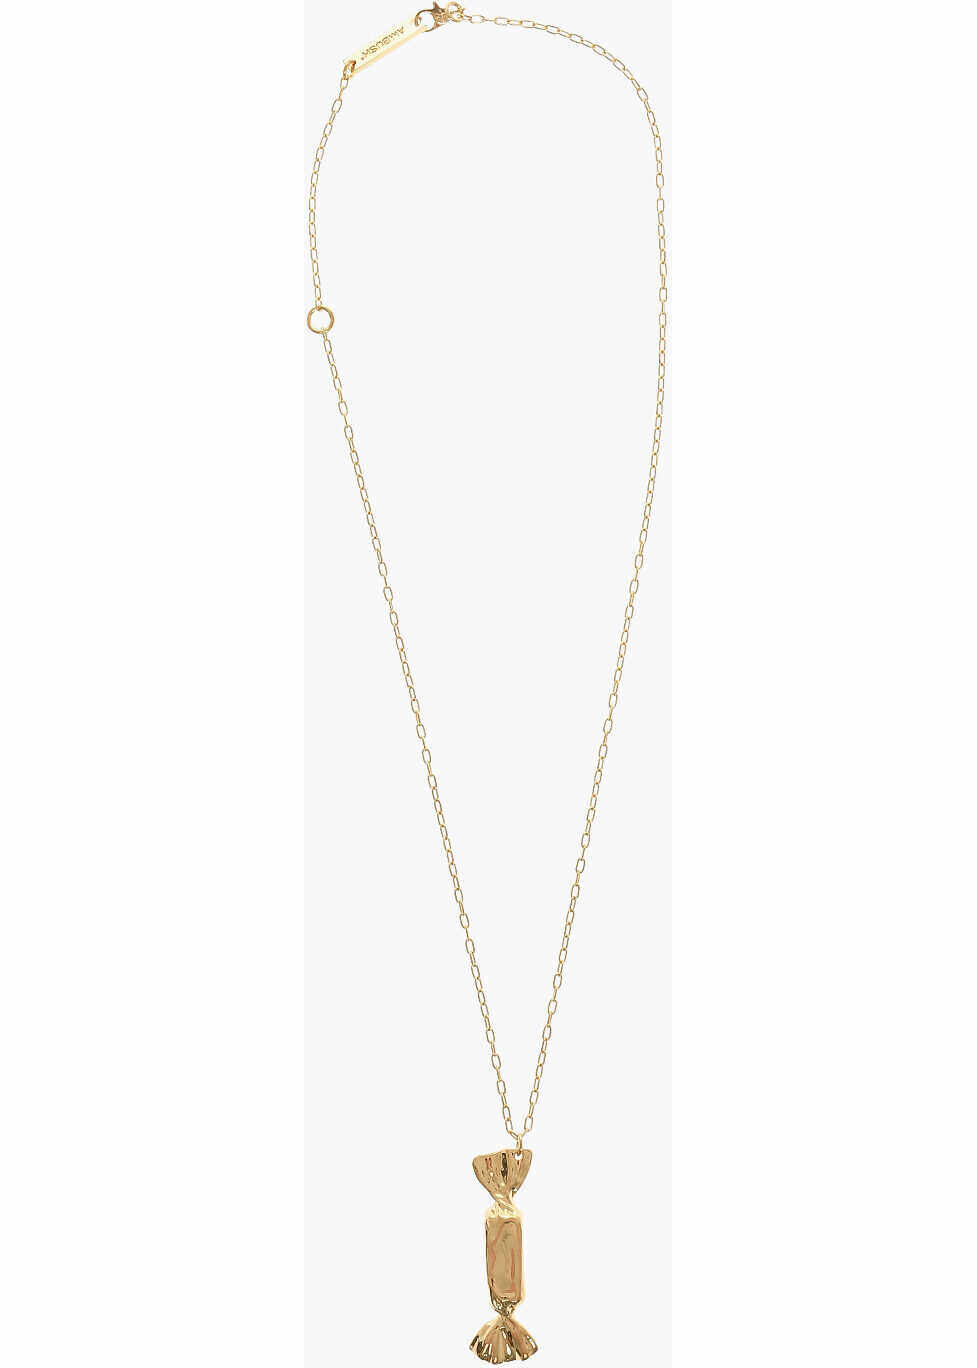 AMBUSH Silver Necklace With Candy Shaped Pendant Gold